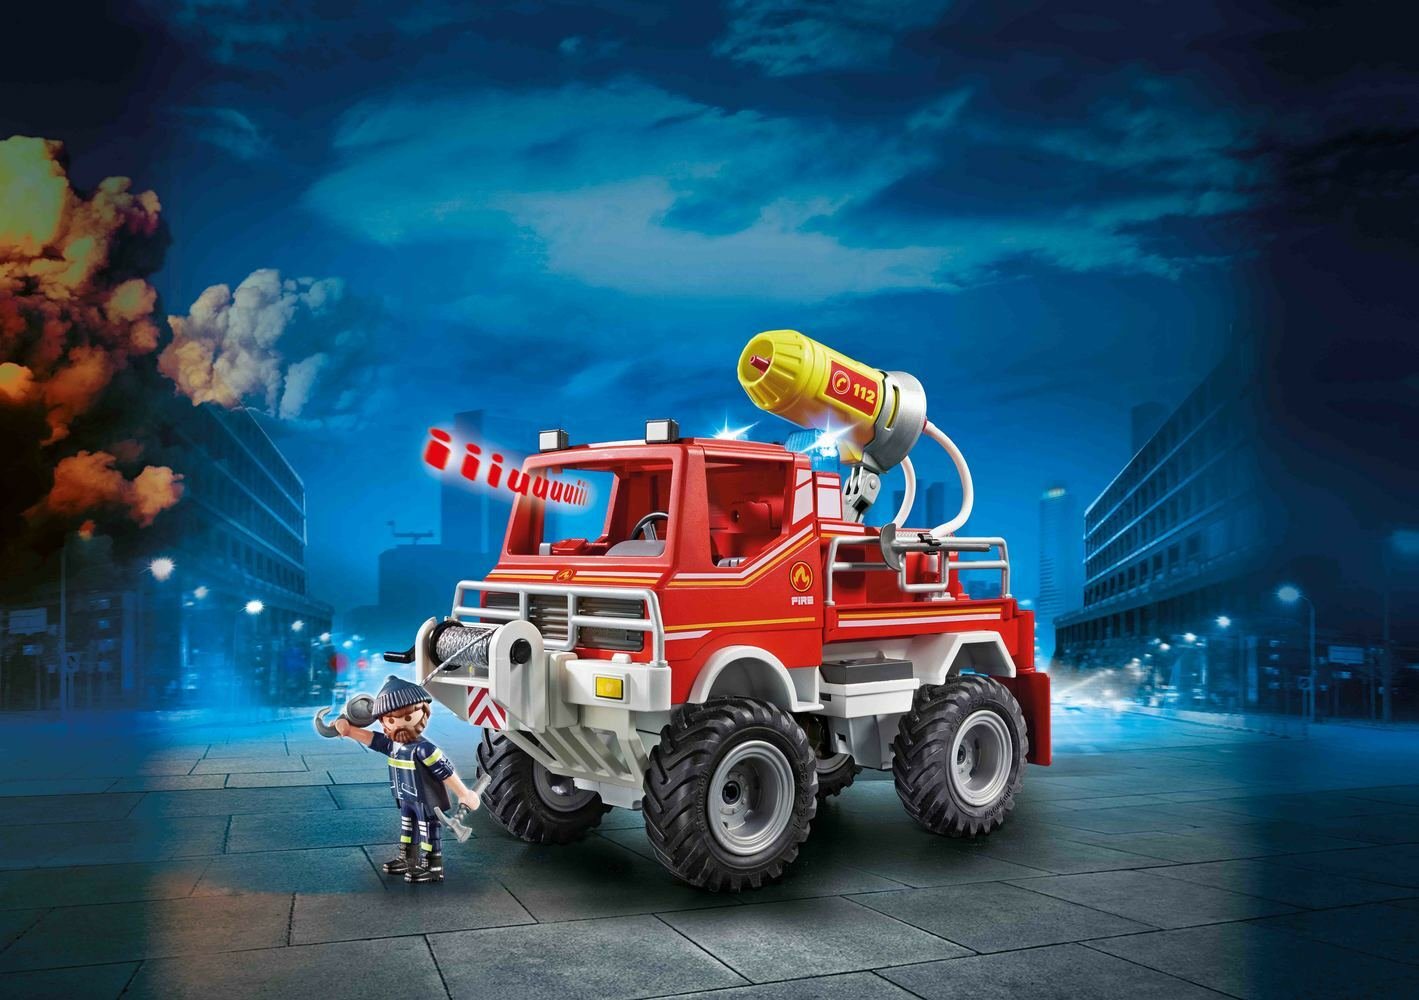 Playmobil 9466 City Action Fire Truck Review